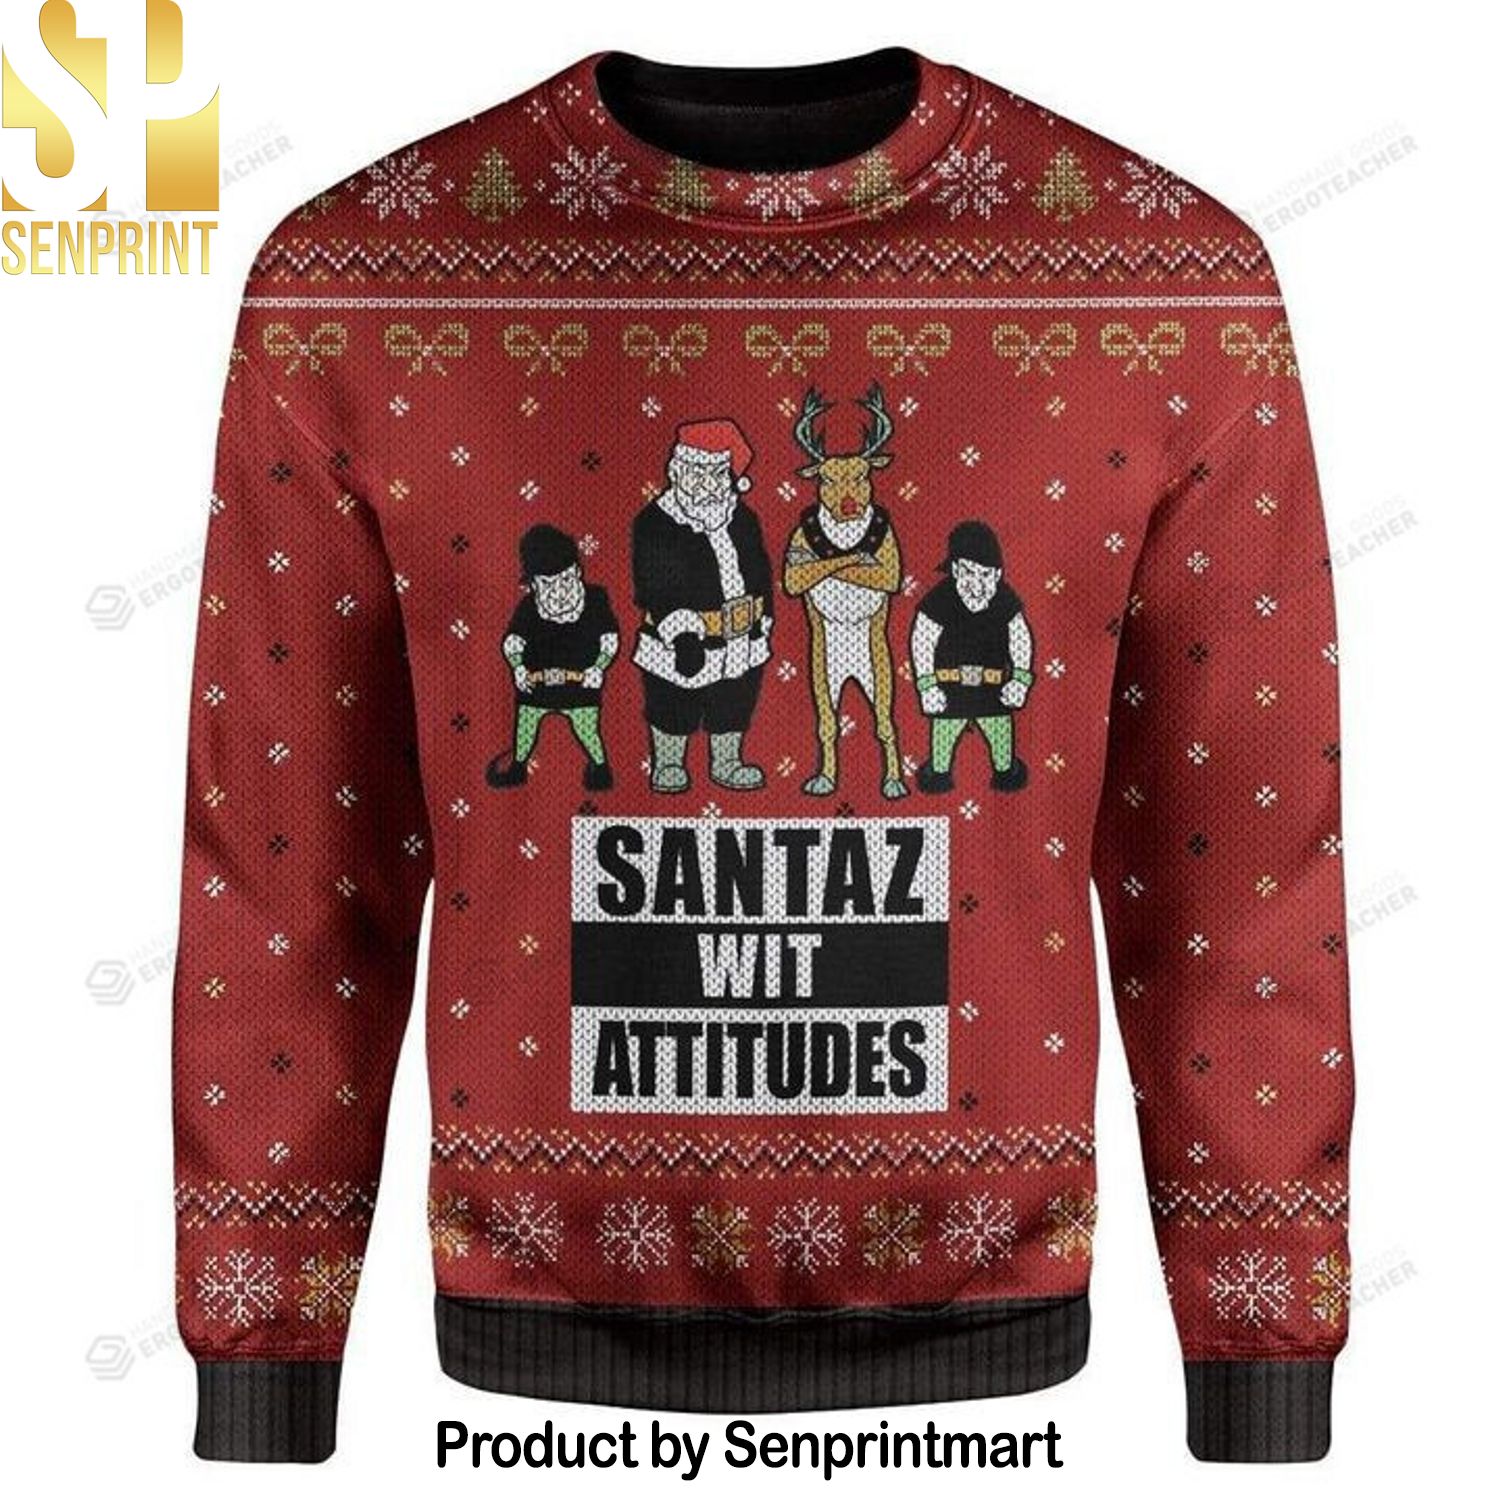 Santaz Wit Attitudes For Christmas Gifts 3D Printed Ugly Christmas Sweater